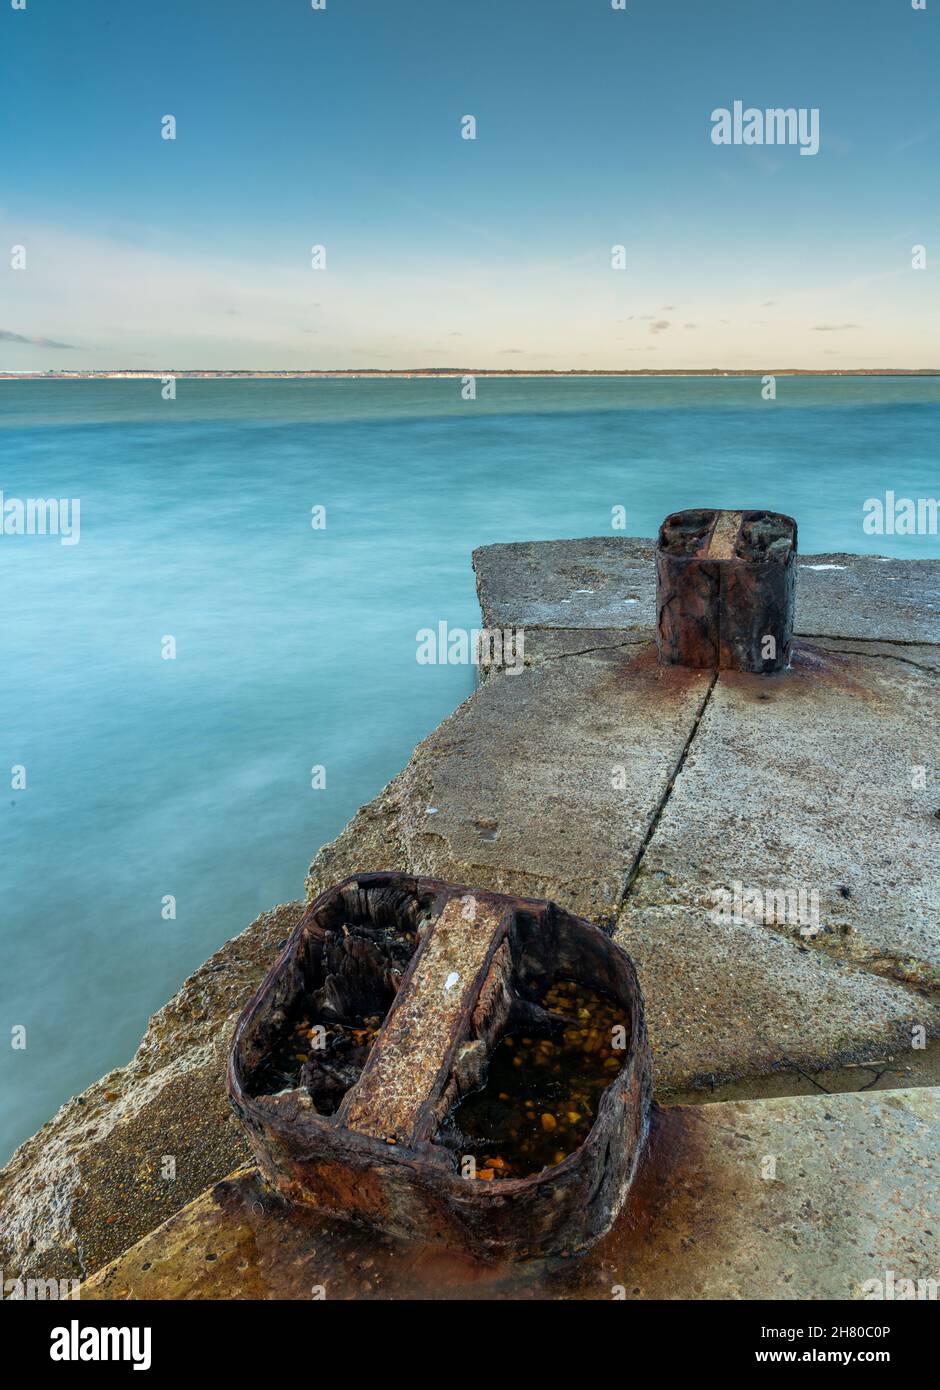 rusty mooring bollards on old derelict concrete seaside pier on the isle of wight coastline, isle of wight seashore, corroded old nautical fittings. Stock Photo